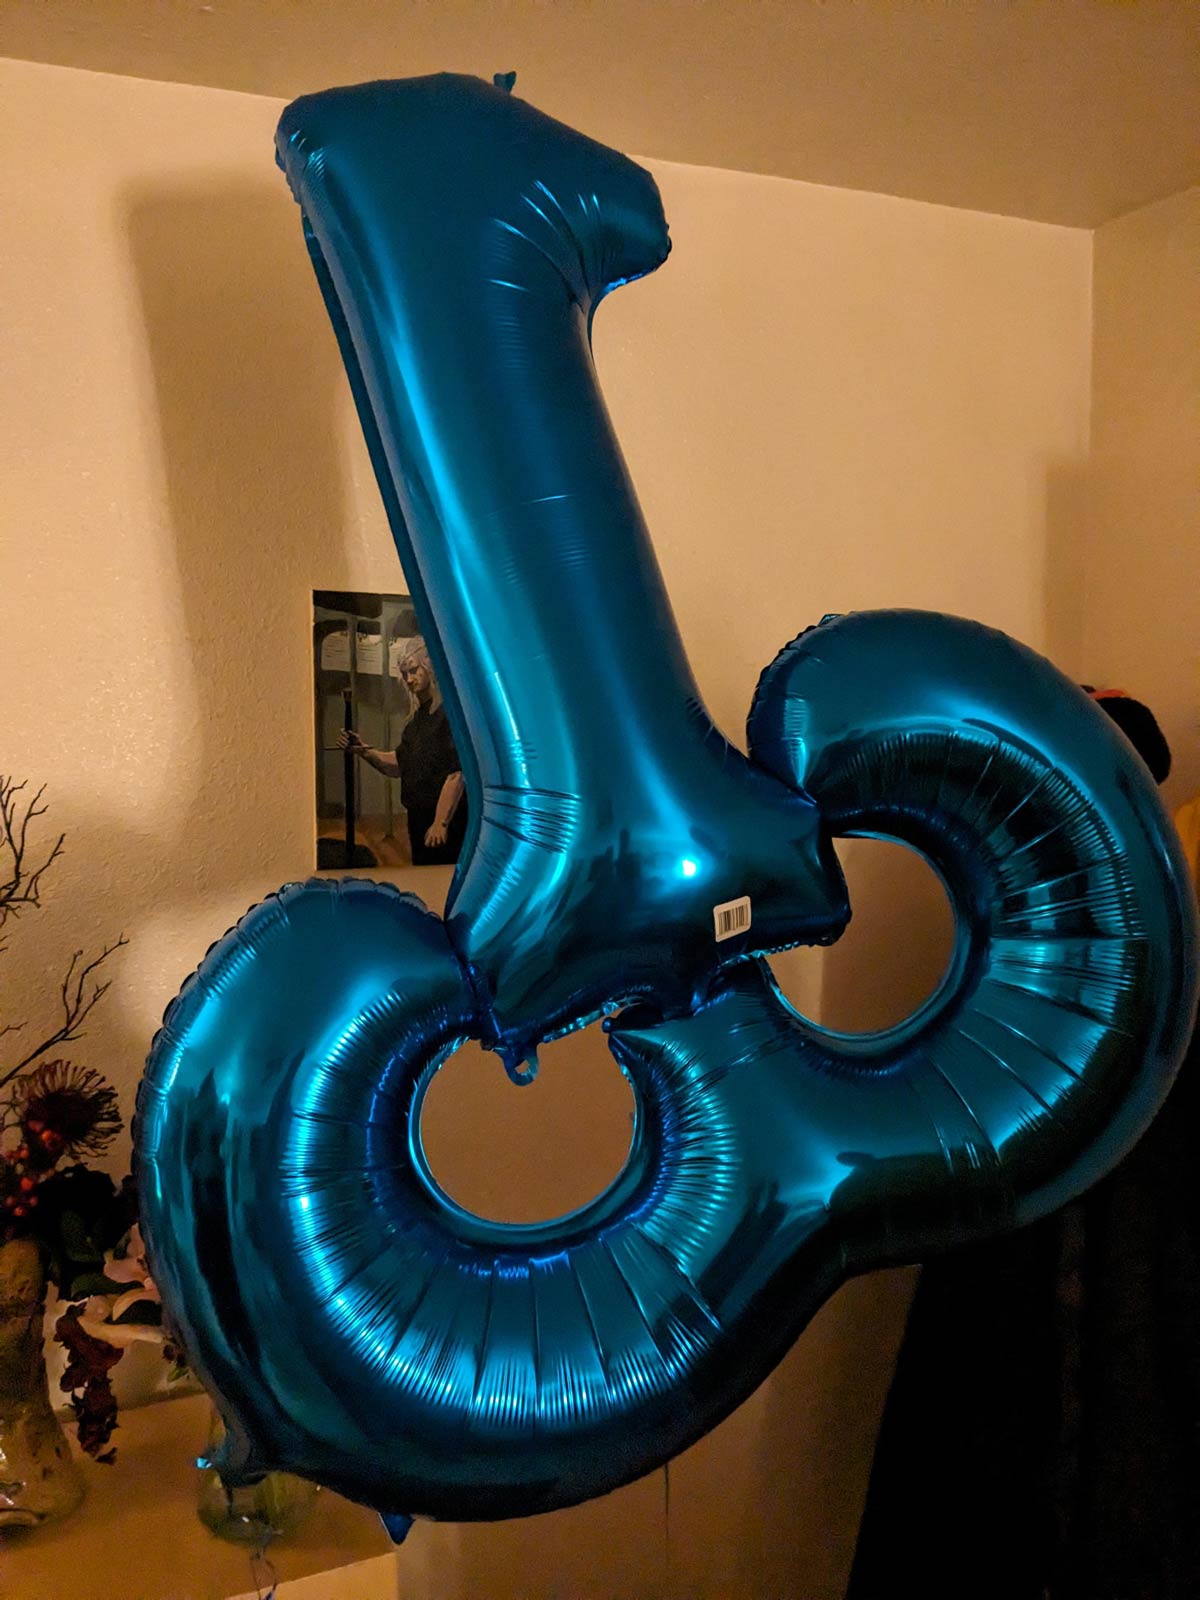 My friend turned 31 this week so I got him some balloons